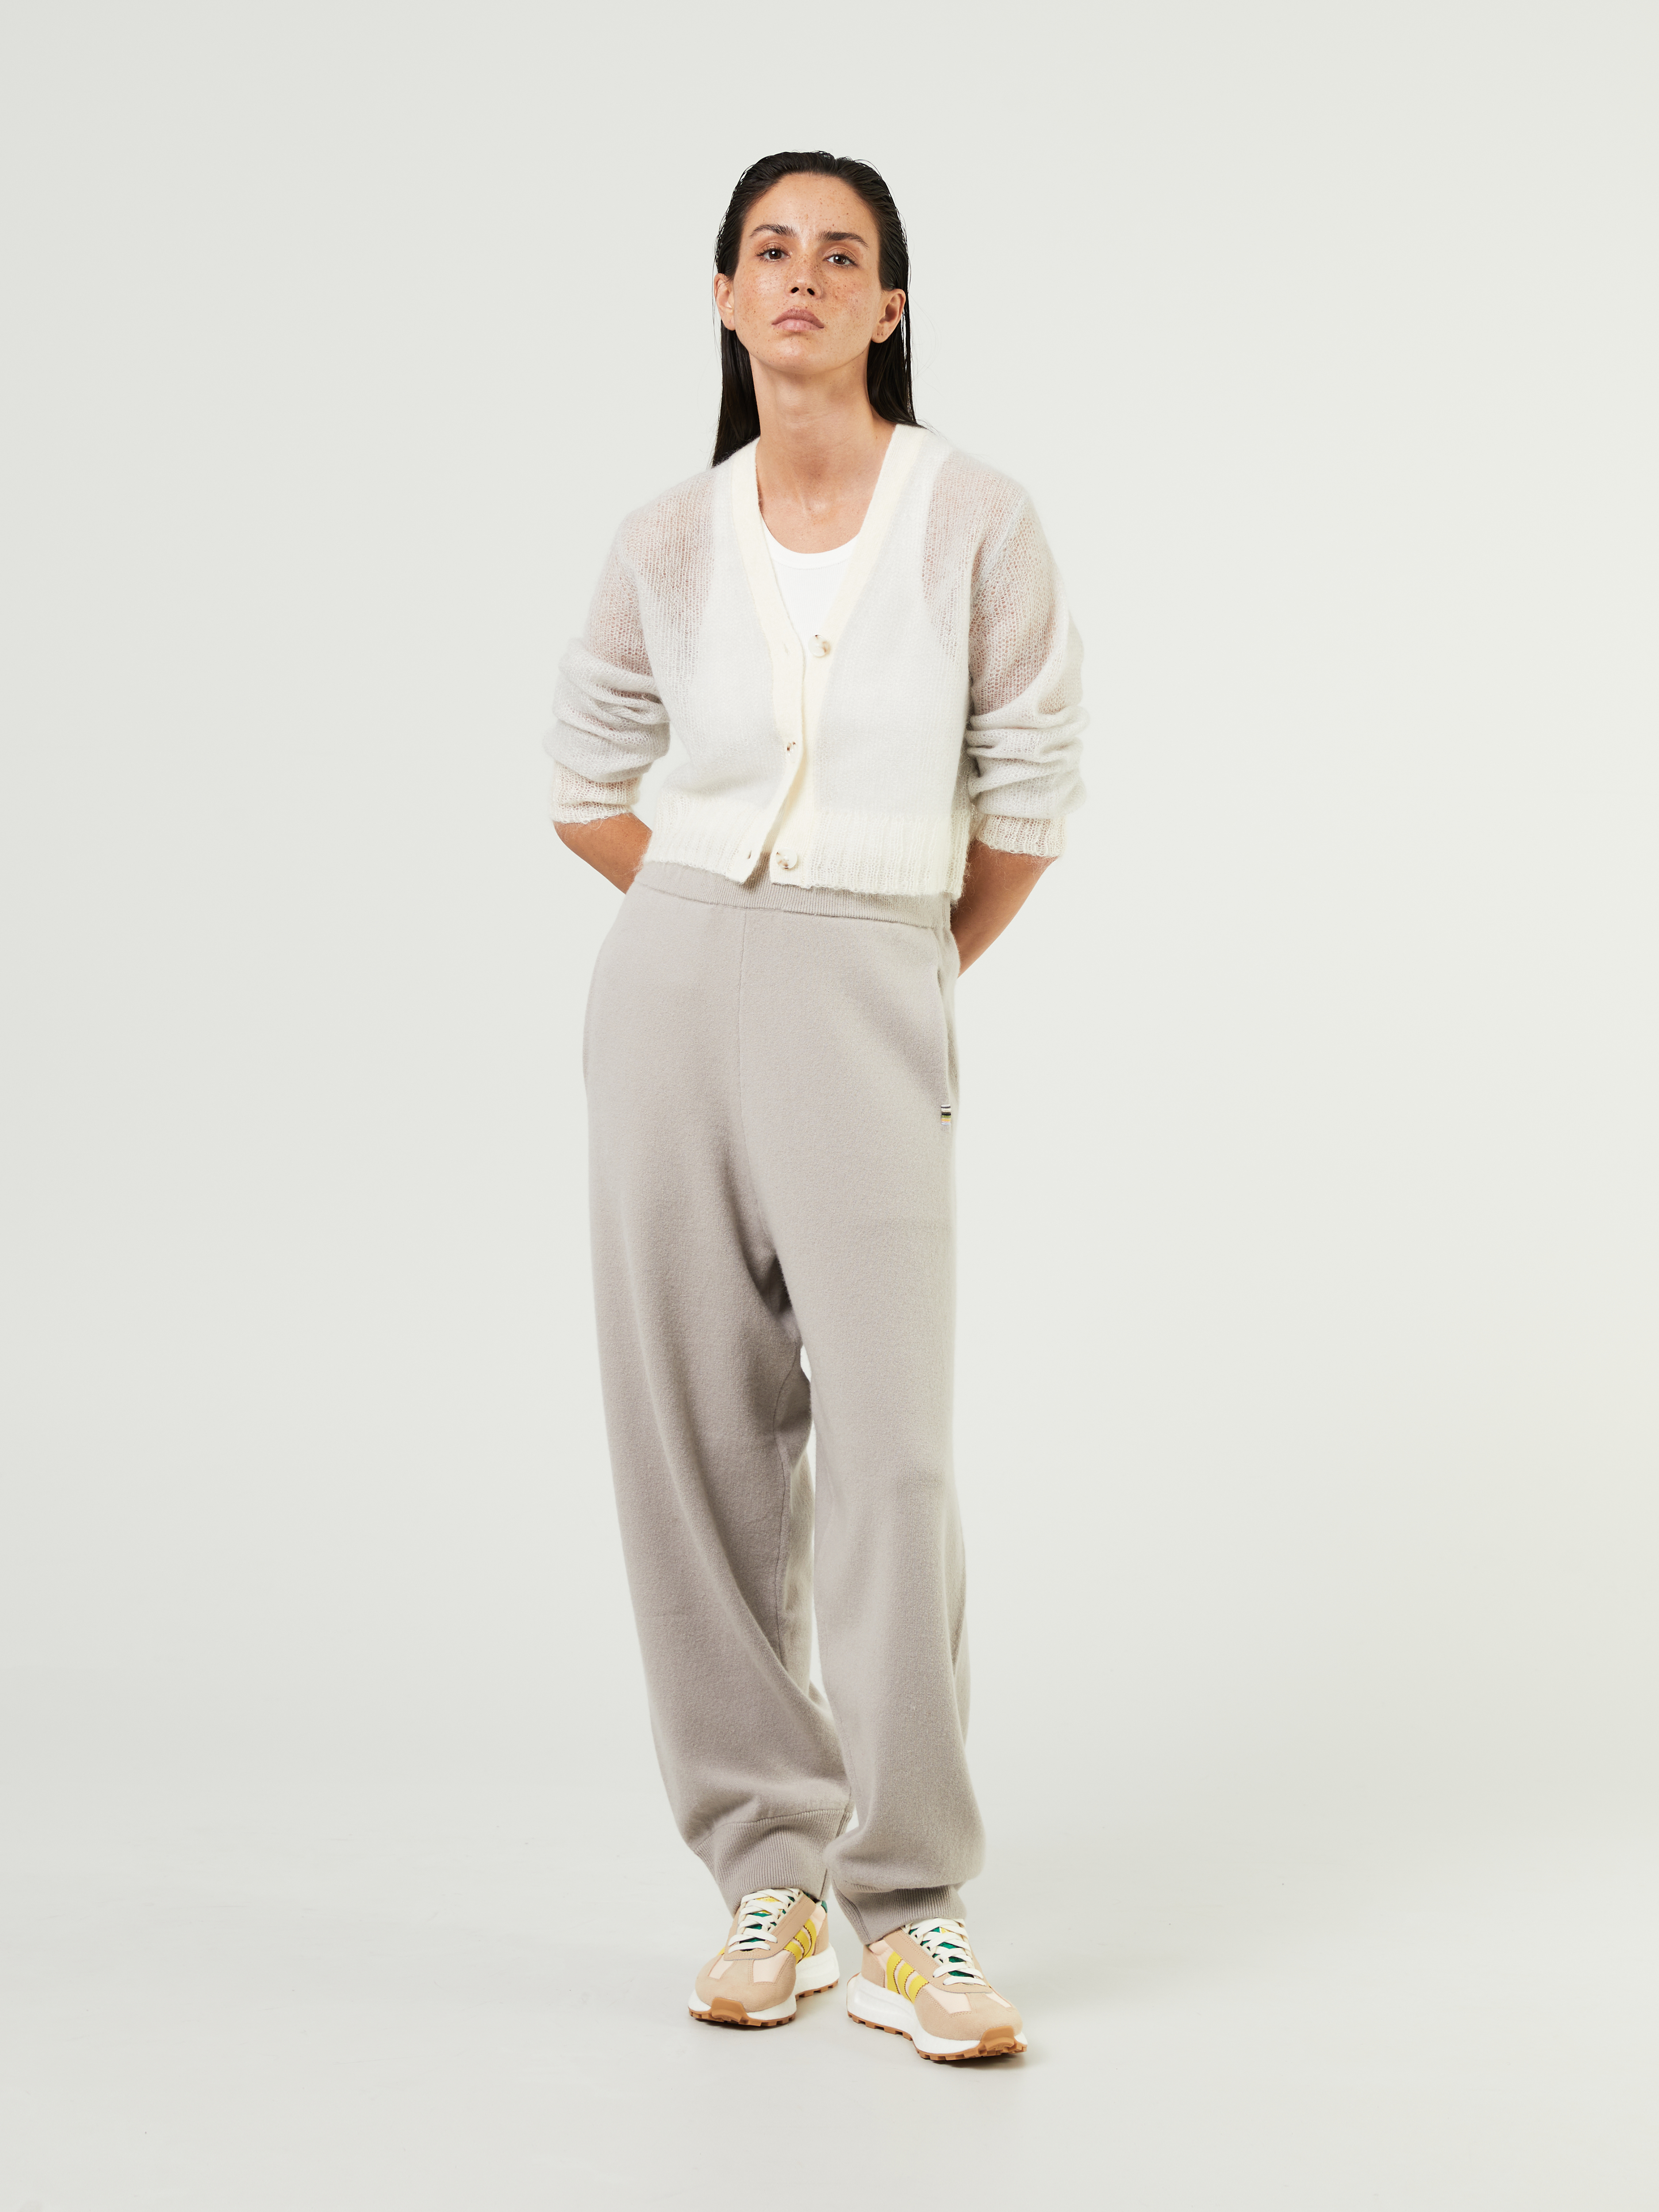 SANTICLER Flare Leg Cashmere Lounge Pant in Fawn – Santicler